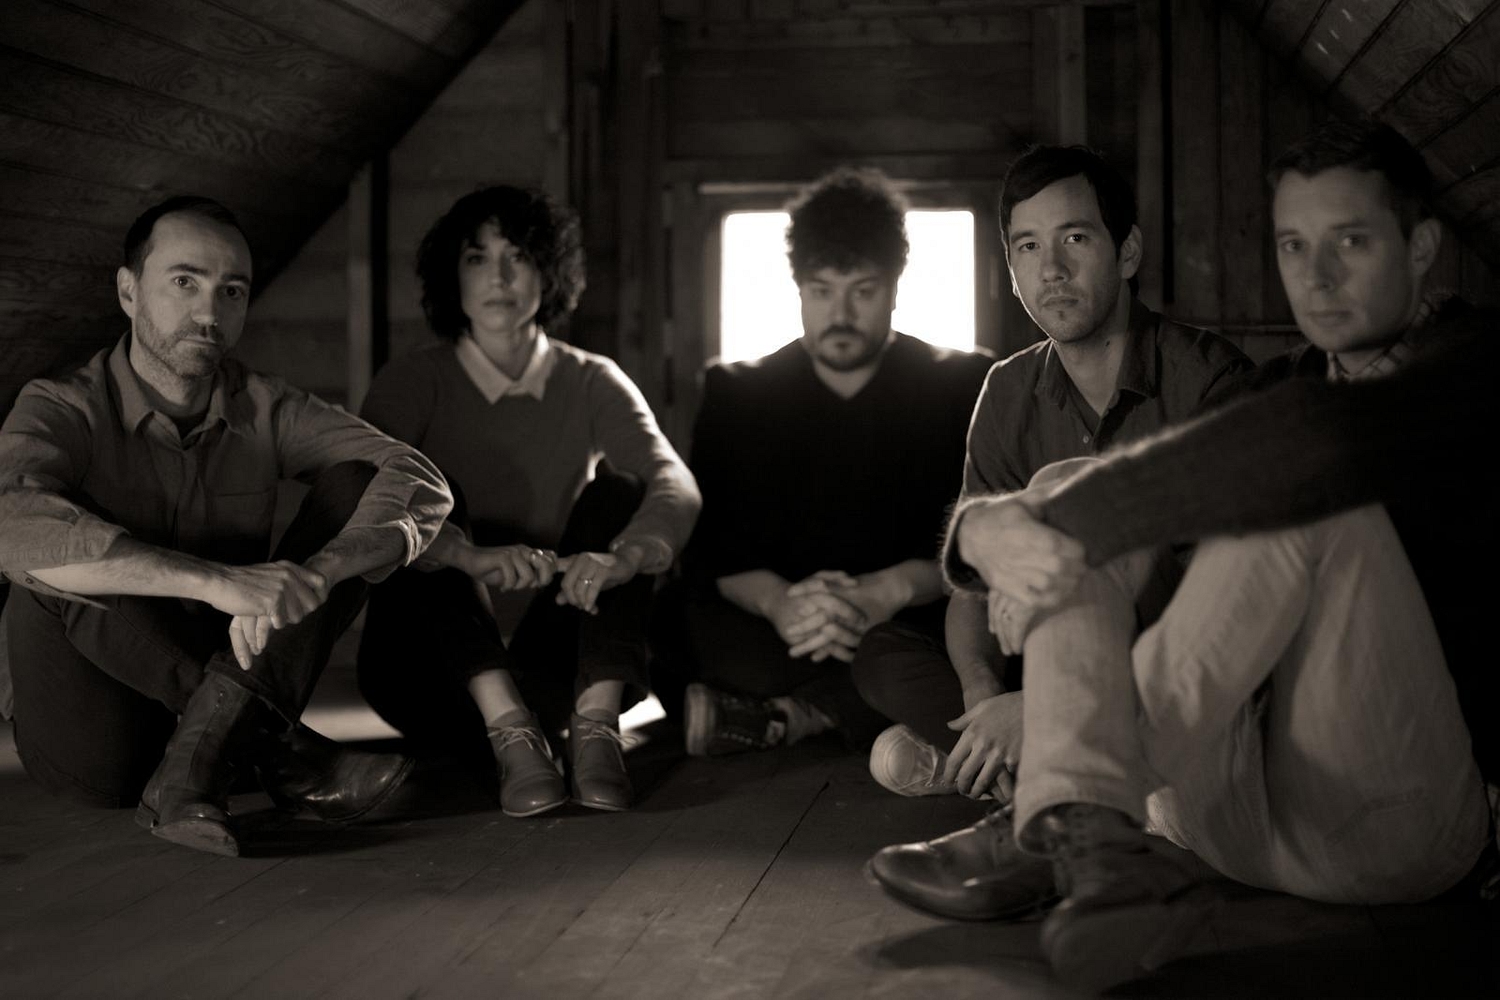 The Shins debut new song ‘The Fear’ on American radio